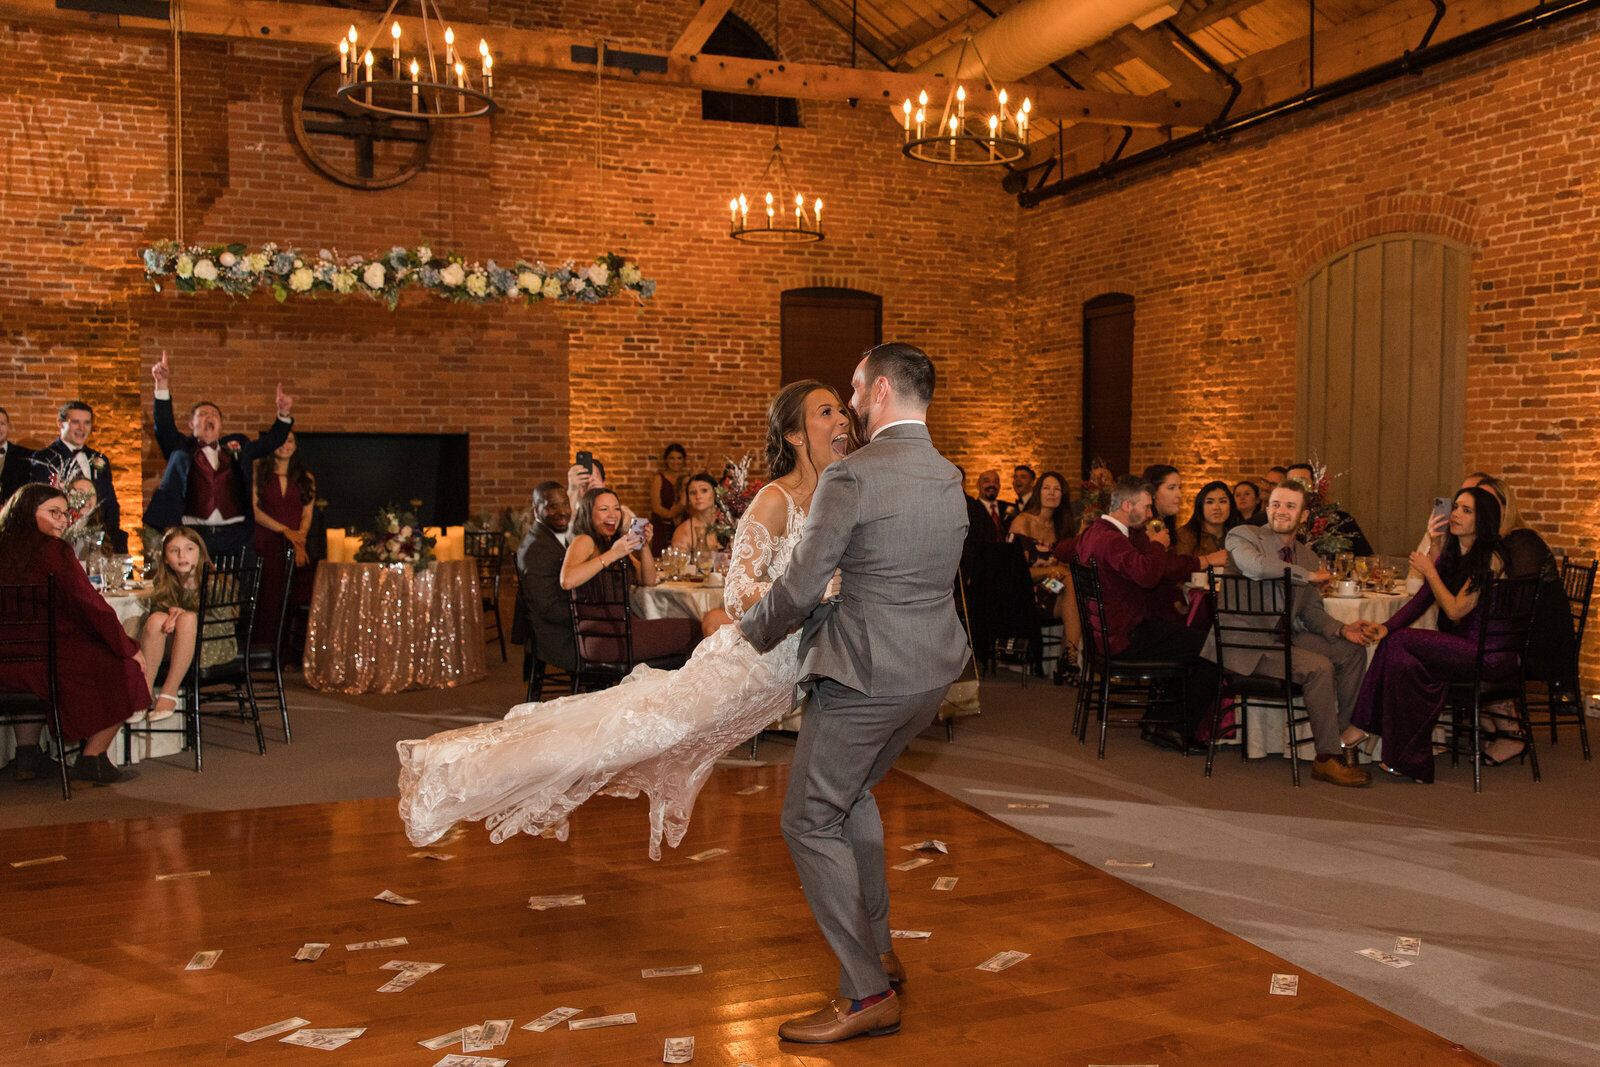 First dance photo in Cork Factory Hotel wedding photographed by Christa Rae Photography